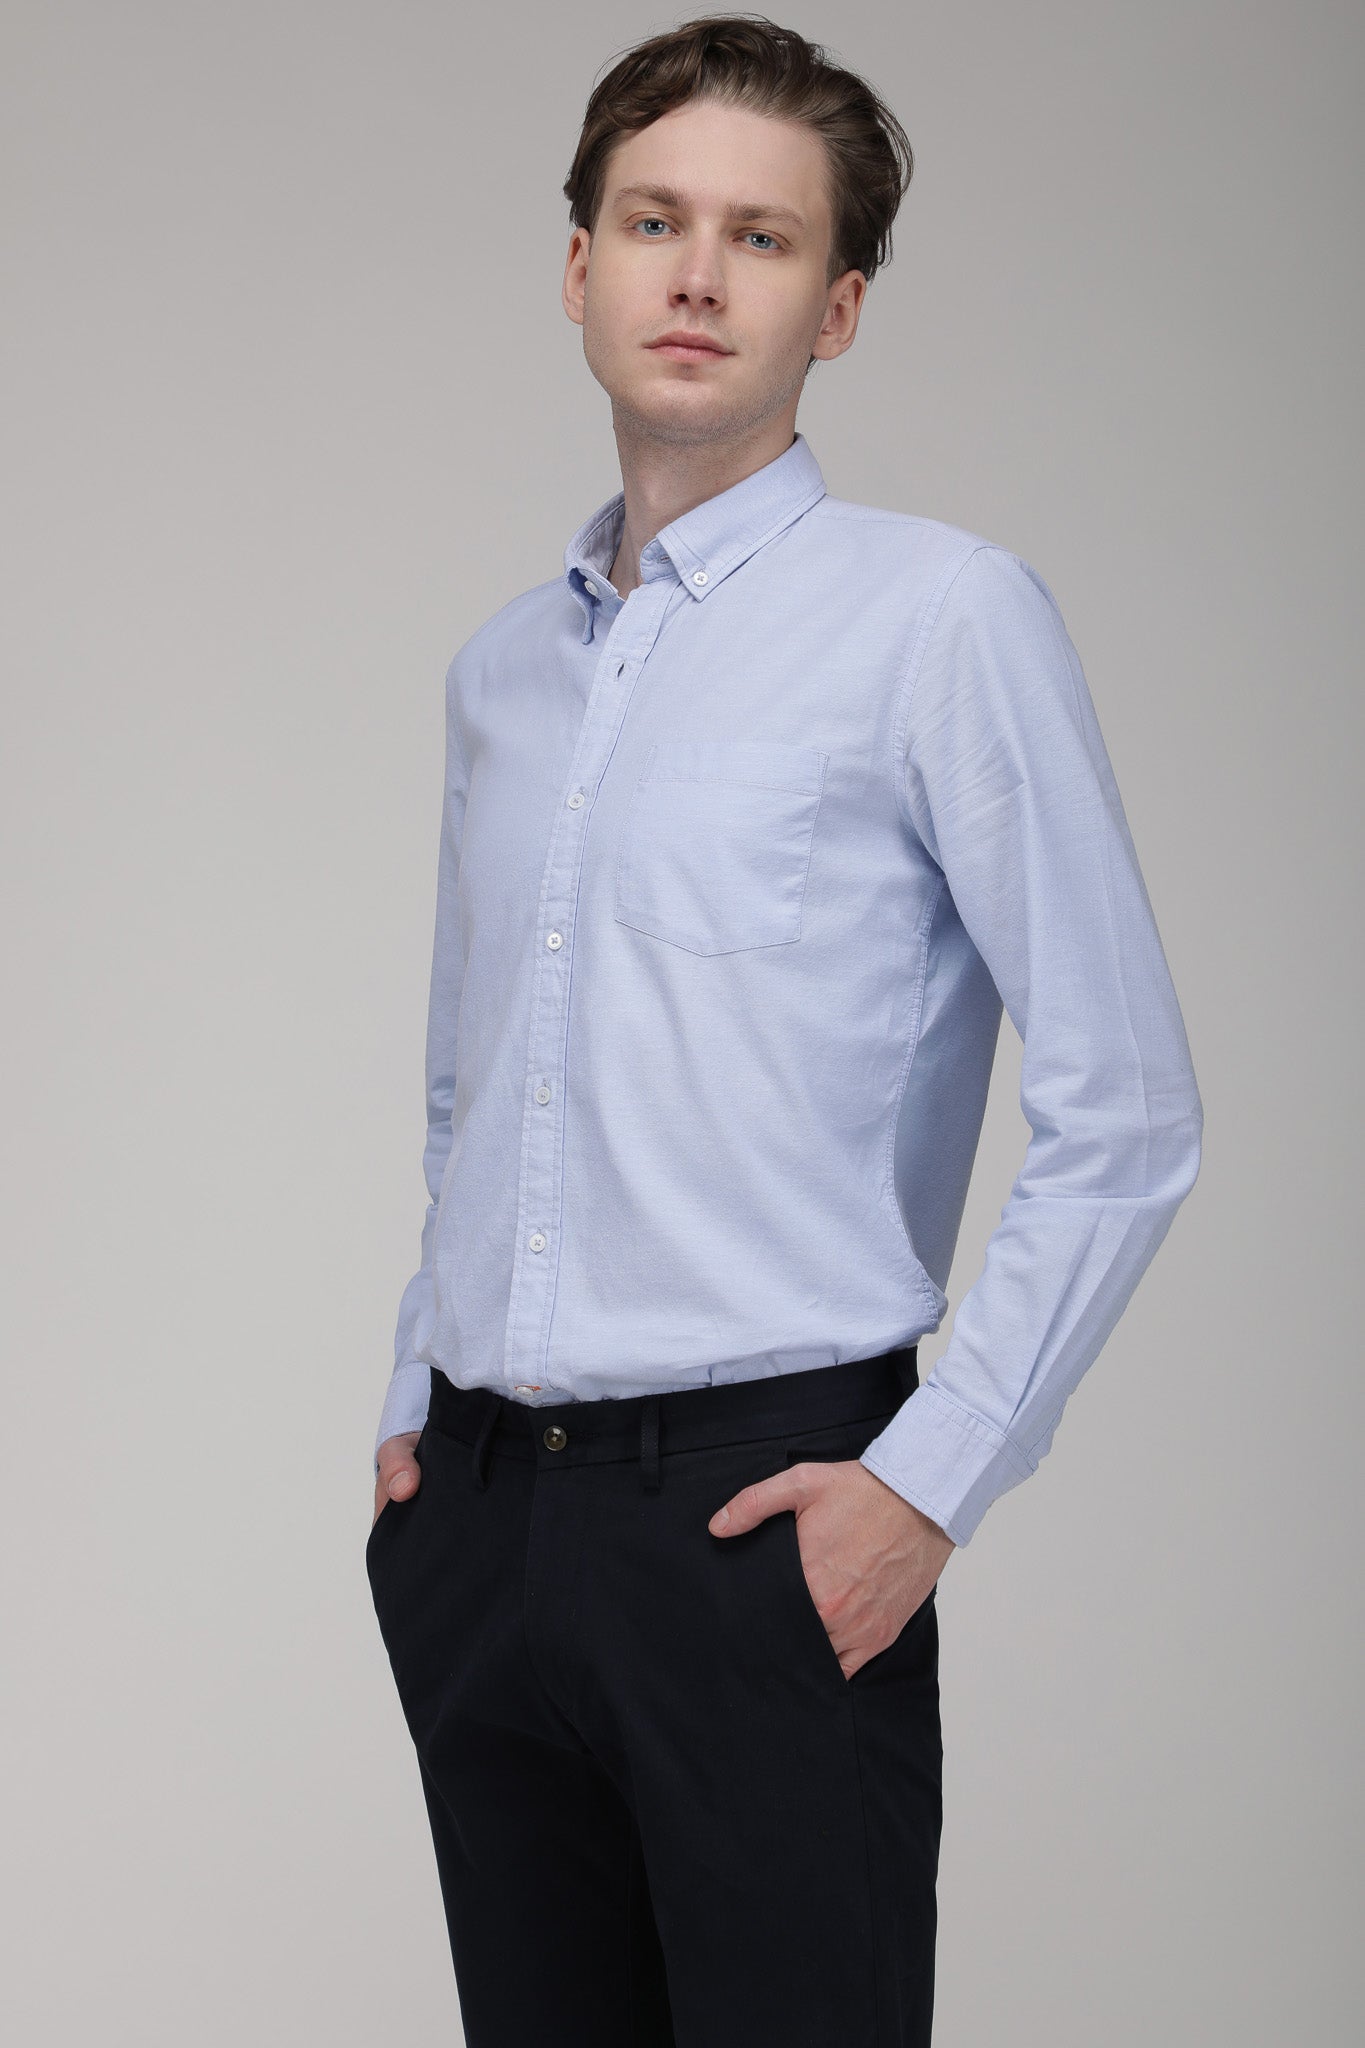 Bare Brown Solid Cotton Oxford Shirt, Slim Fit with Full Sleeves - Sky Blue